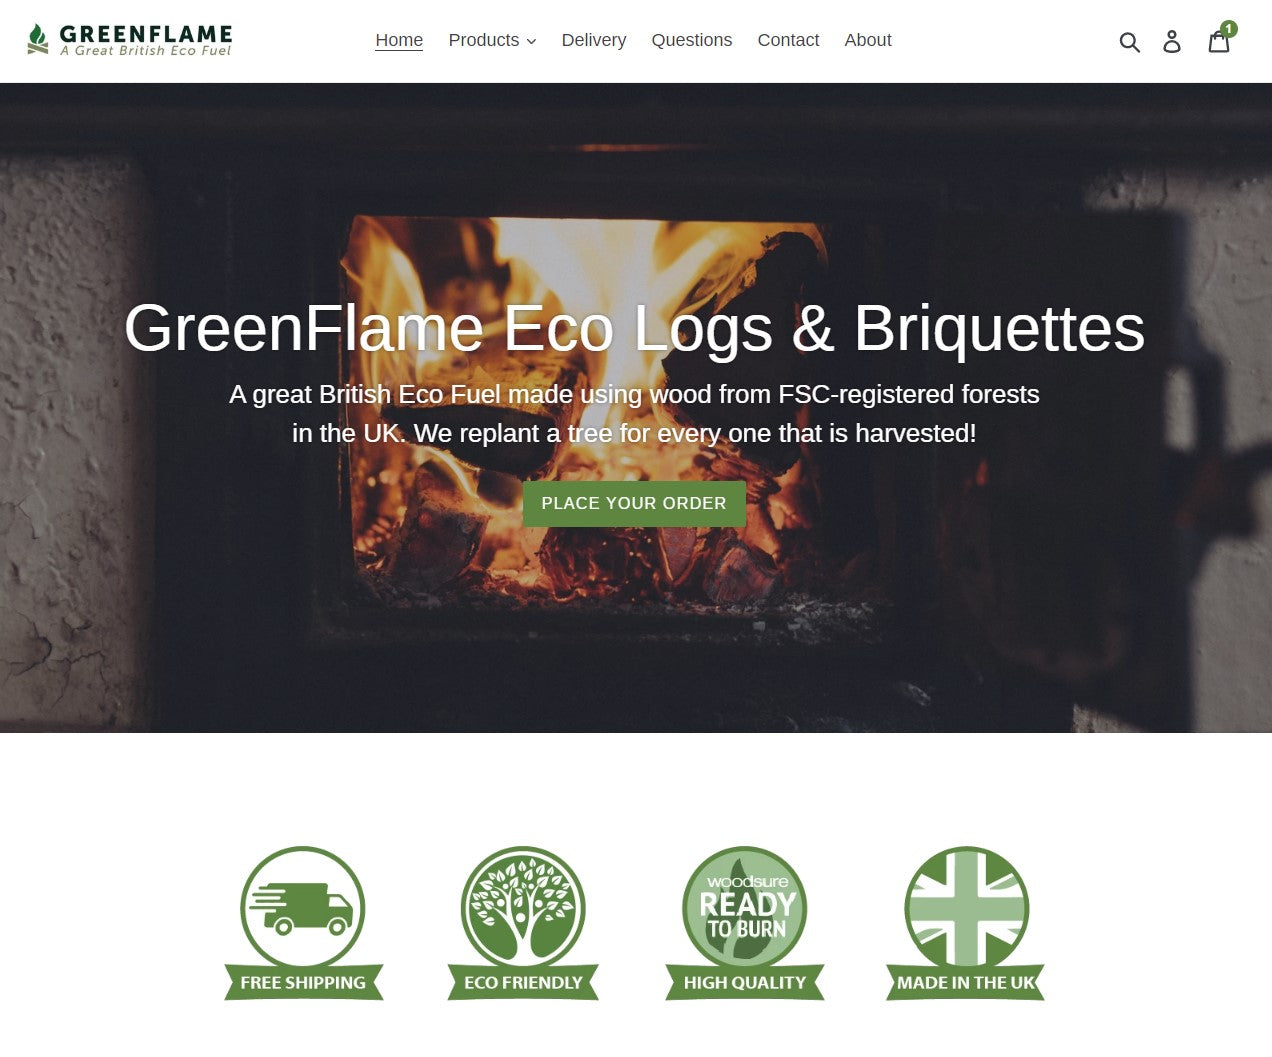 GreenFlame Eco Logs and Briquettes